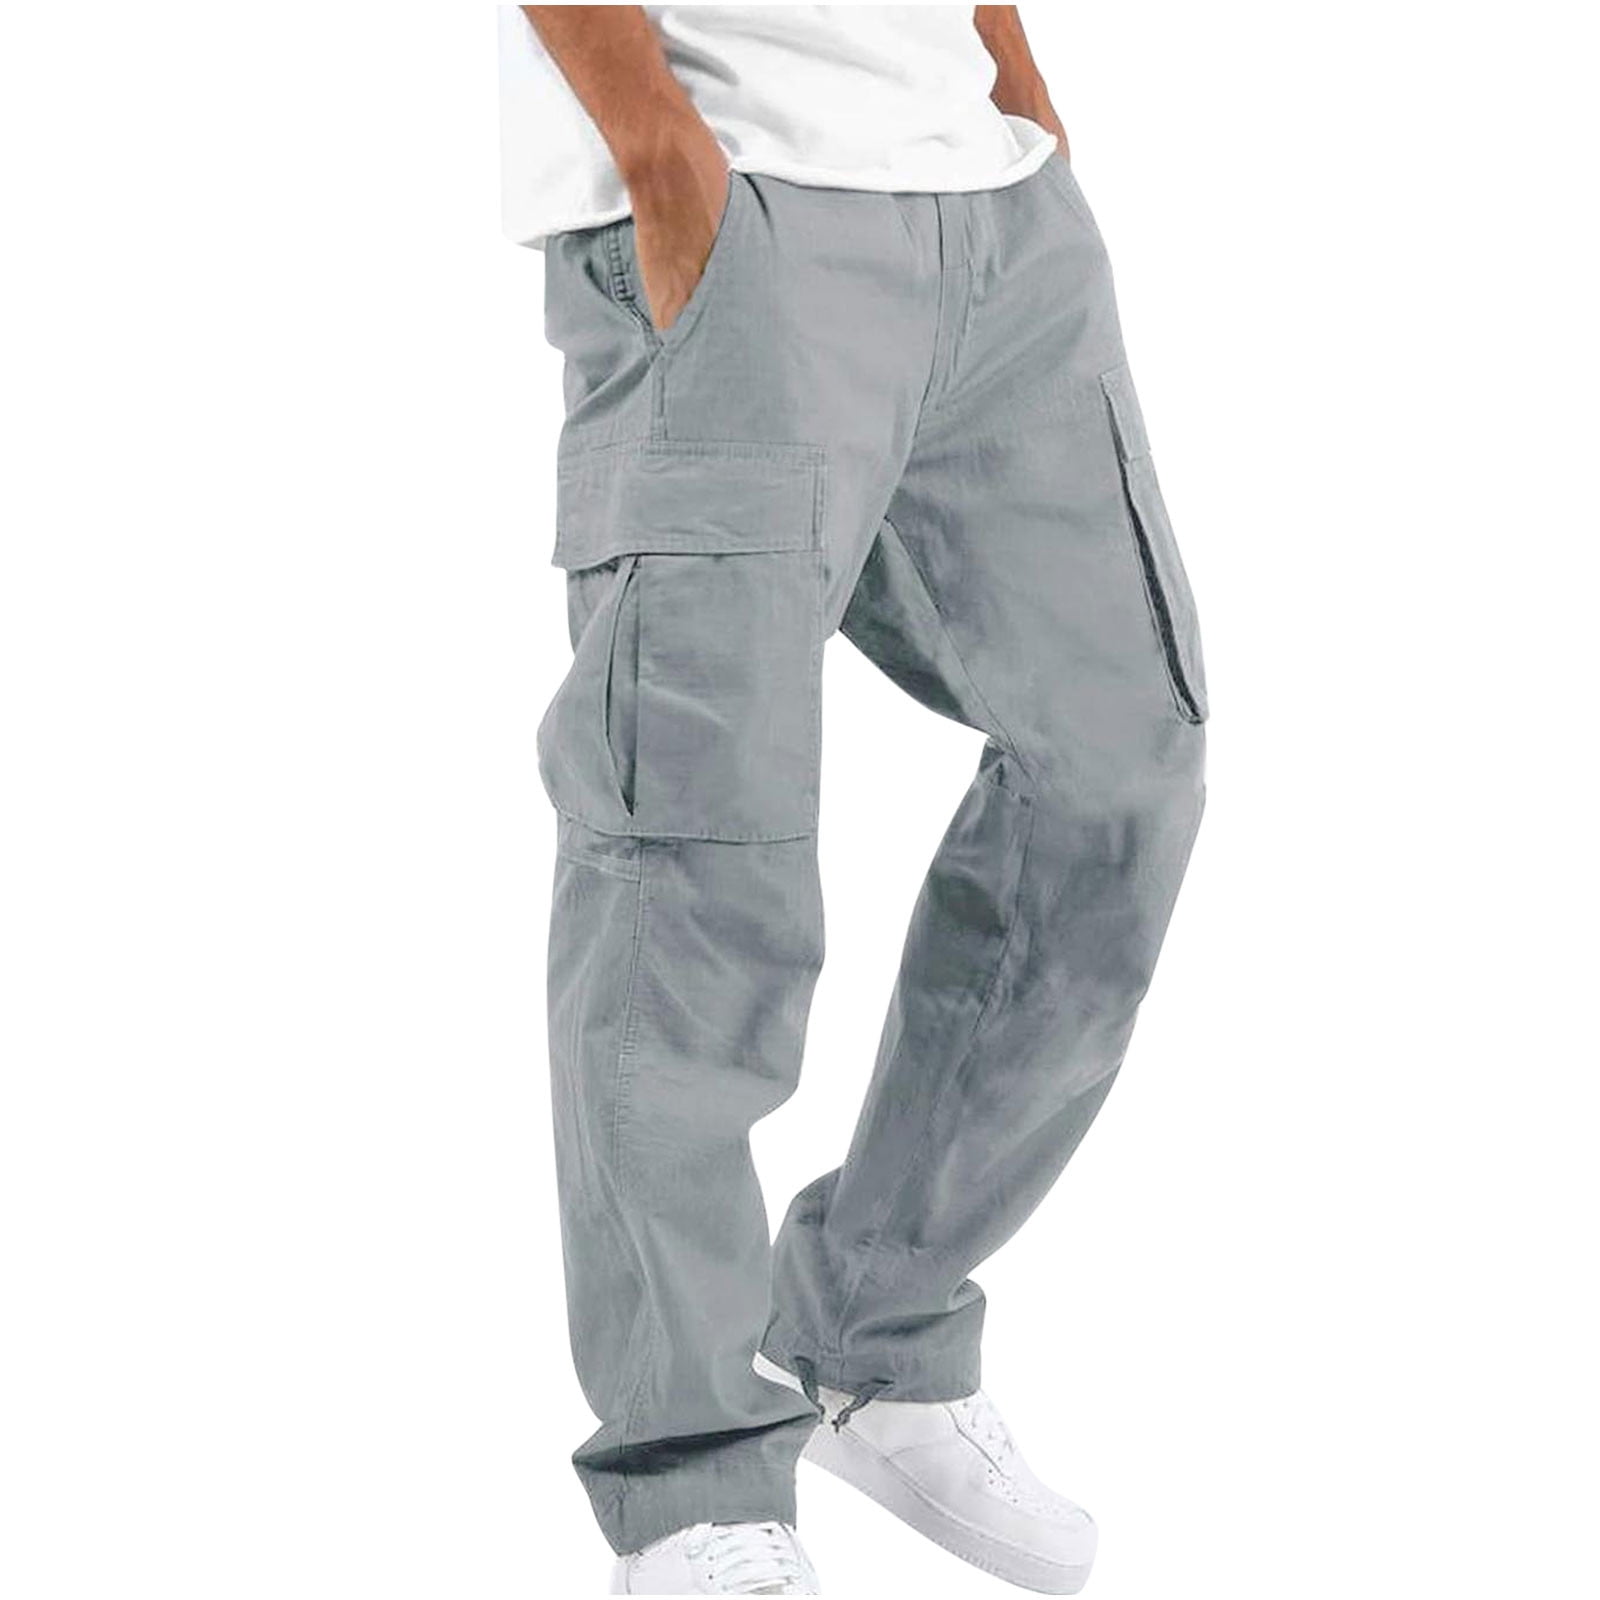 Ivoc Trousers - Buy Ivoc Trousers online in India